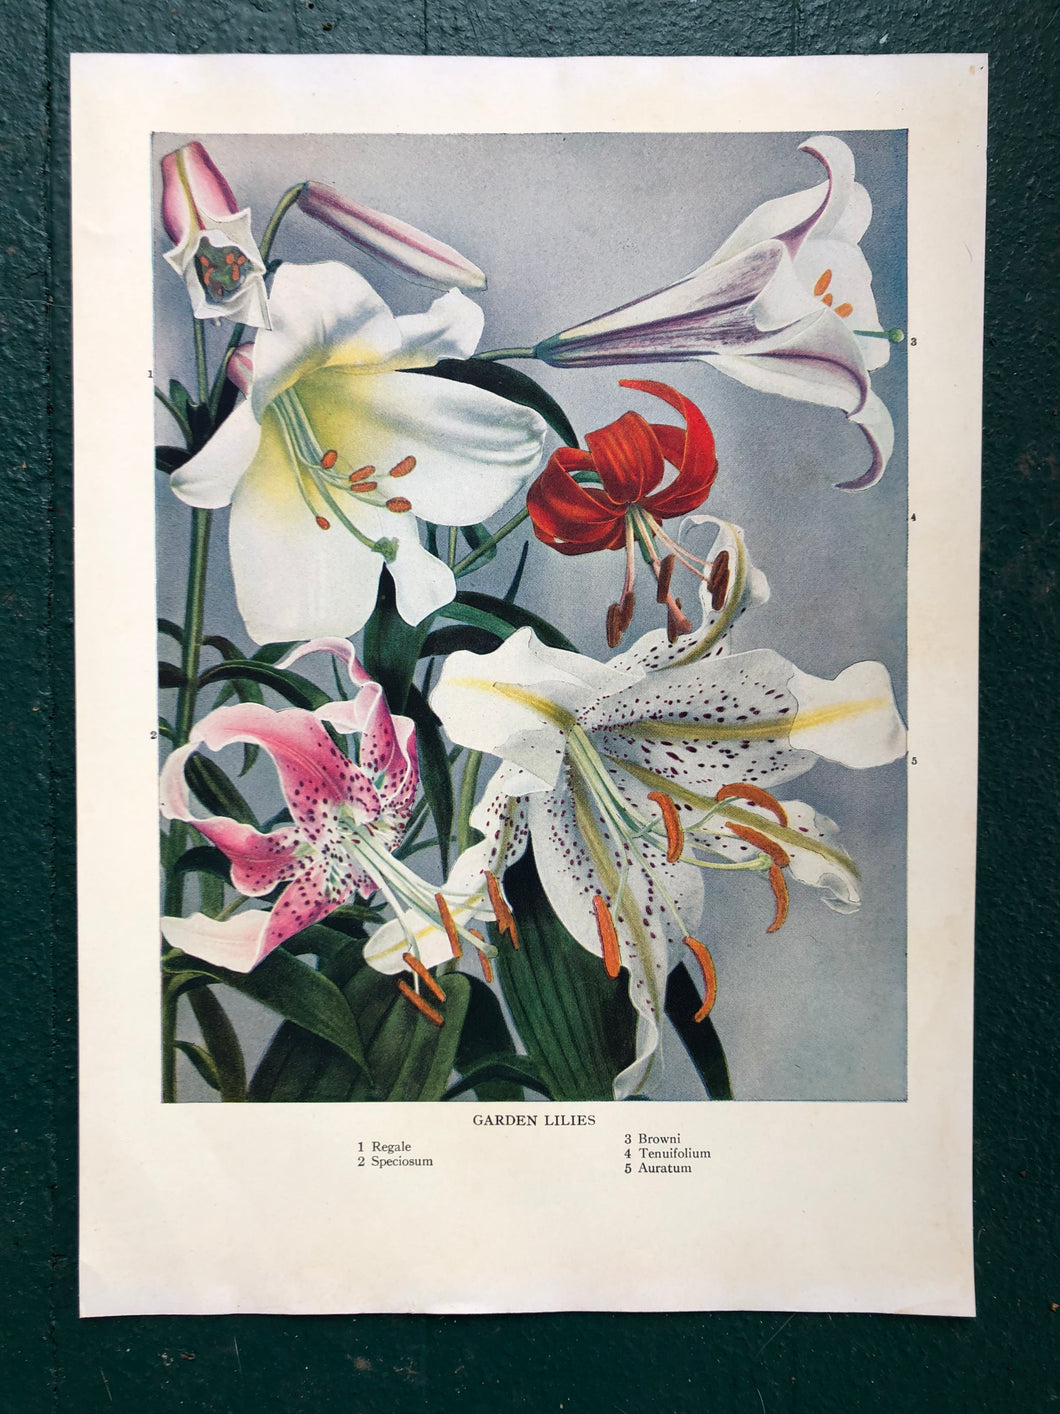 Garden Lilies print from “The Practical Encyclopedia of Gardening”